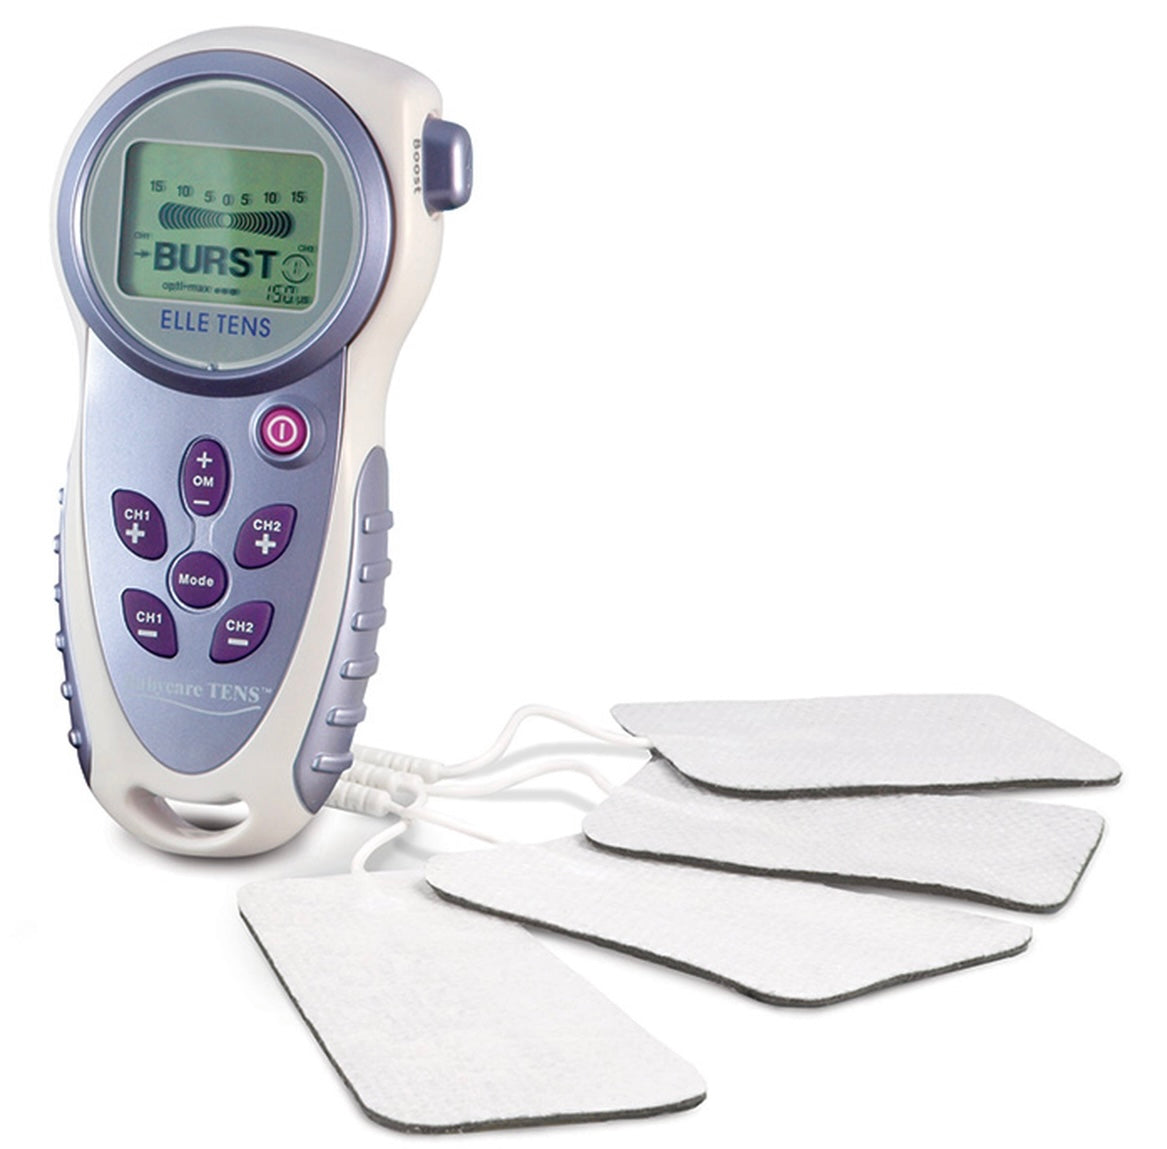 Image of Babycare Tens Elle machine with electrode maternity pads. The display shows boost function